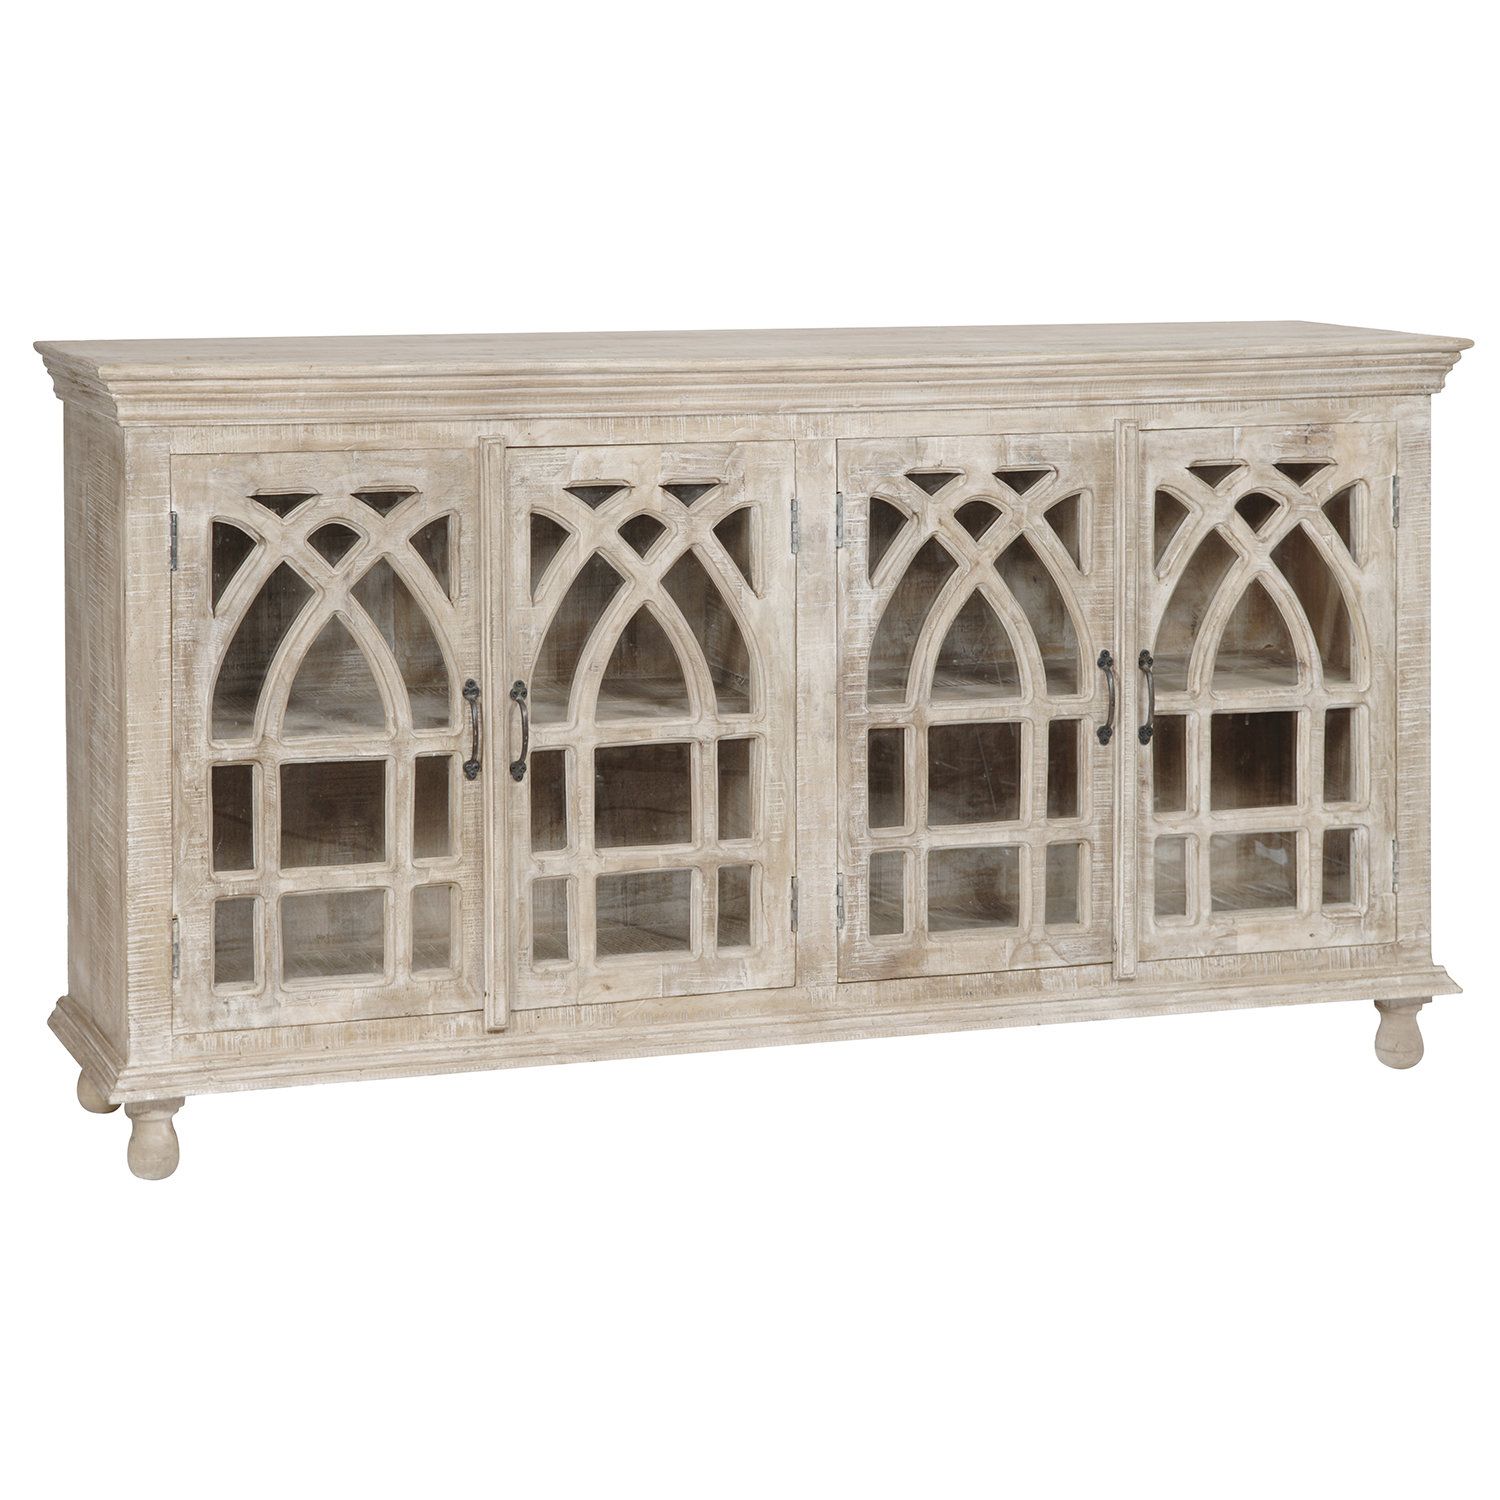 Eligah Mango Wood Cathedral Design Tall 4 Door Accent Cabinet With Regard To Recent Eau Claire 6 Door Accent Cabinets (View 16 of 20)